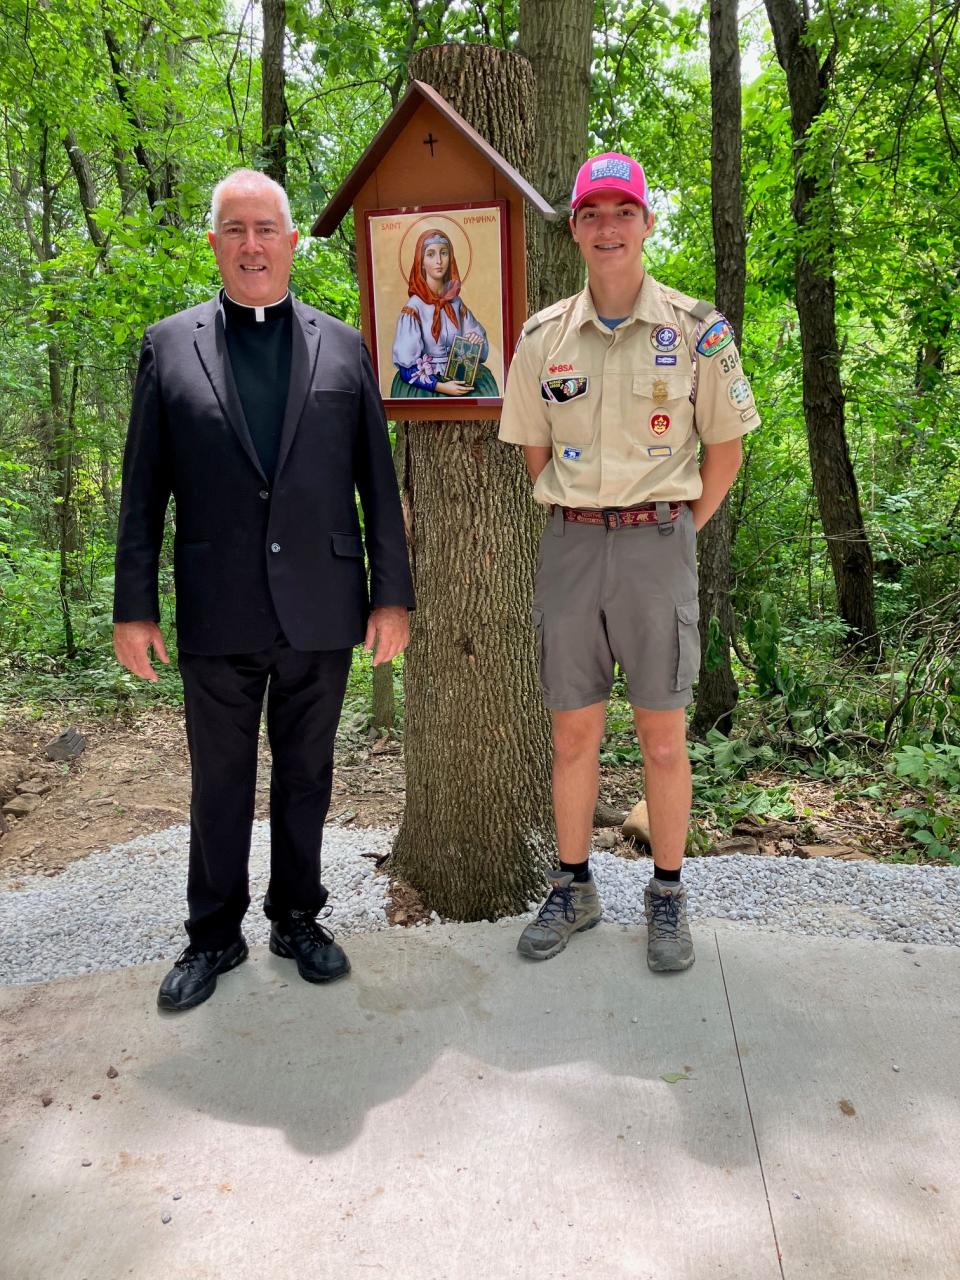 The Rev. David Durkee, pastor of Queen of Heaven Church in Green, and Boy Scout J.P. Moorehead stand at the new shrine to St. Dymphna that Moorehead recently built on the church grounds for his Eagle Scout project.